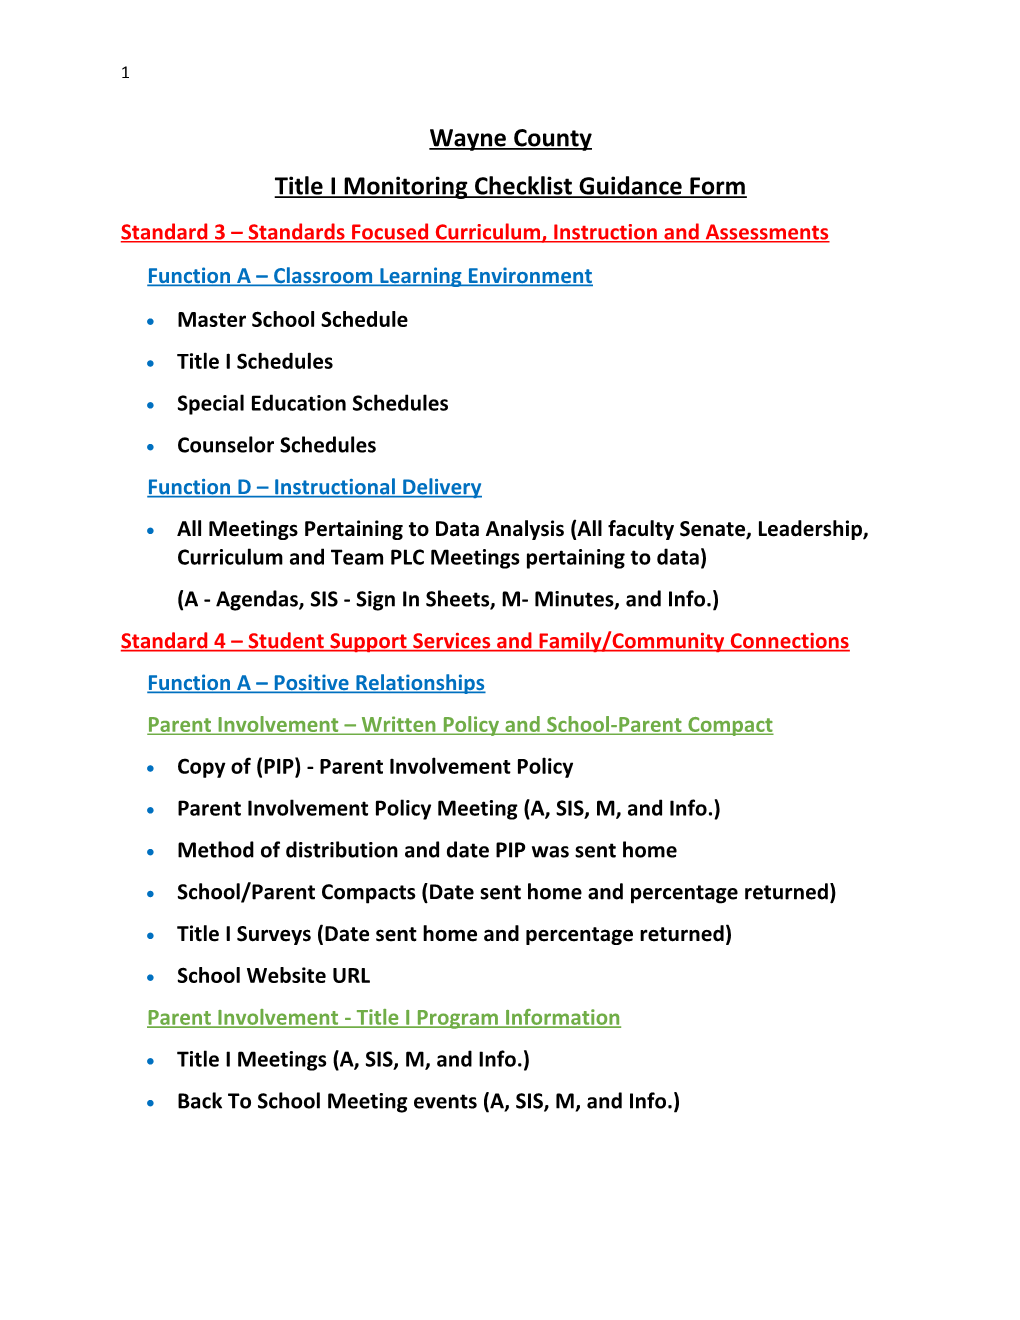 Title I Monitoring Checklist Guidance Form